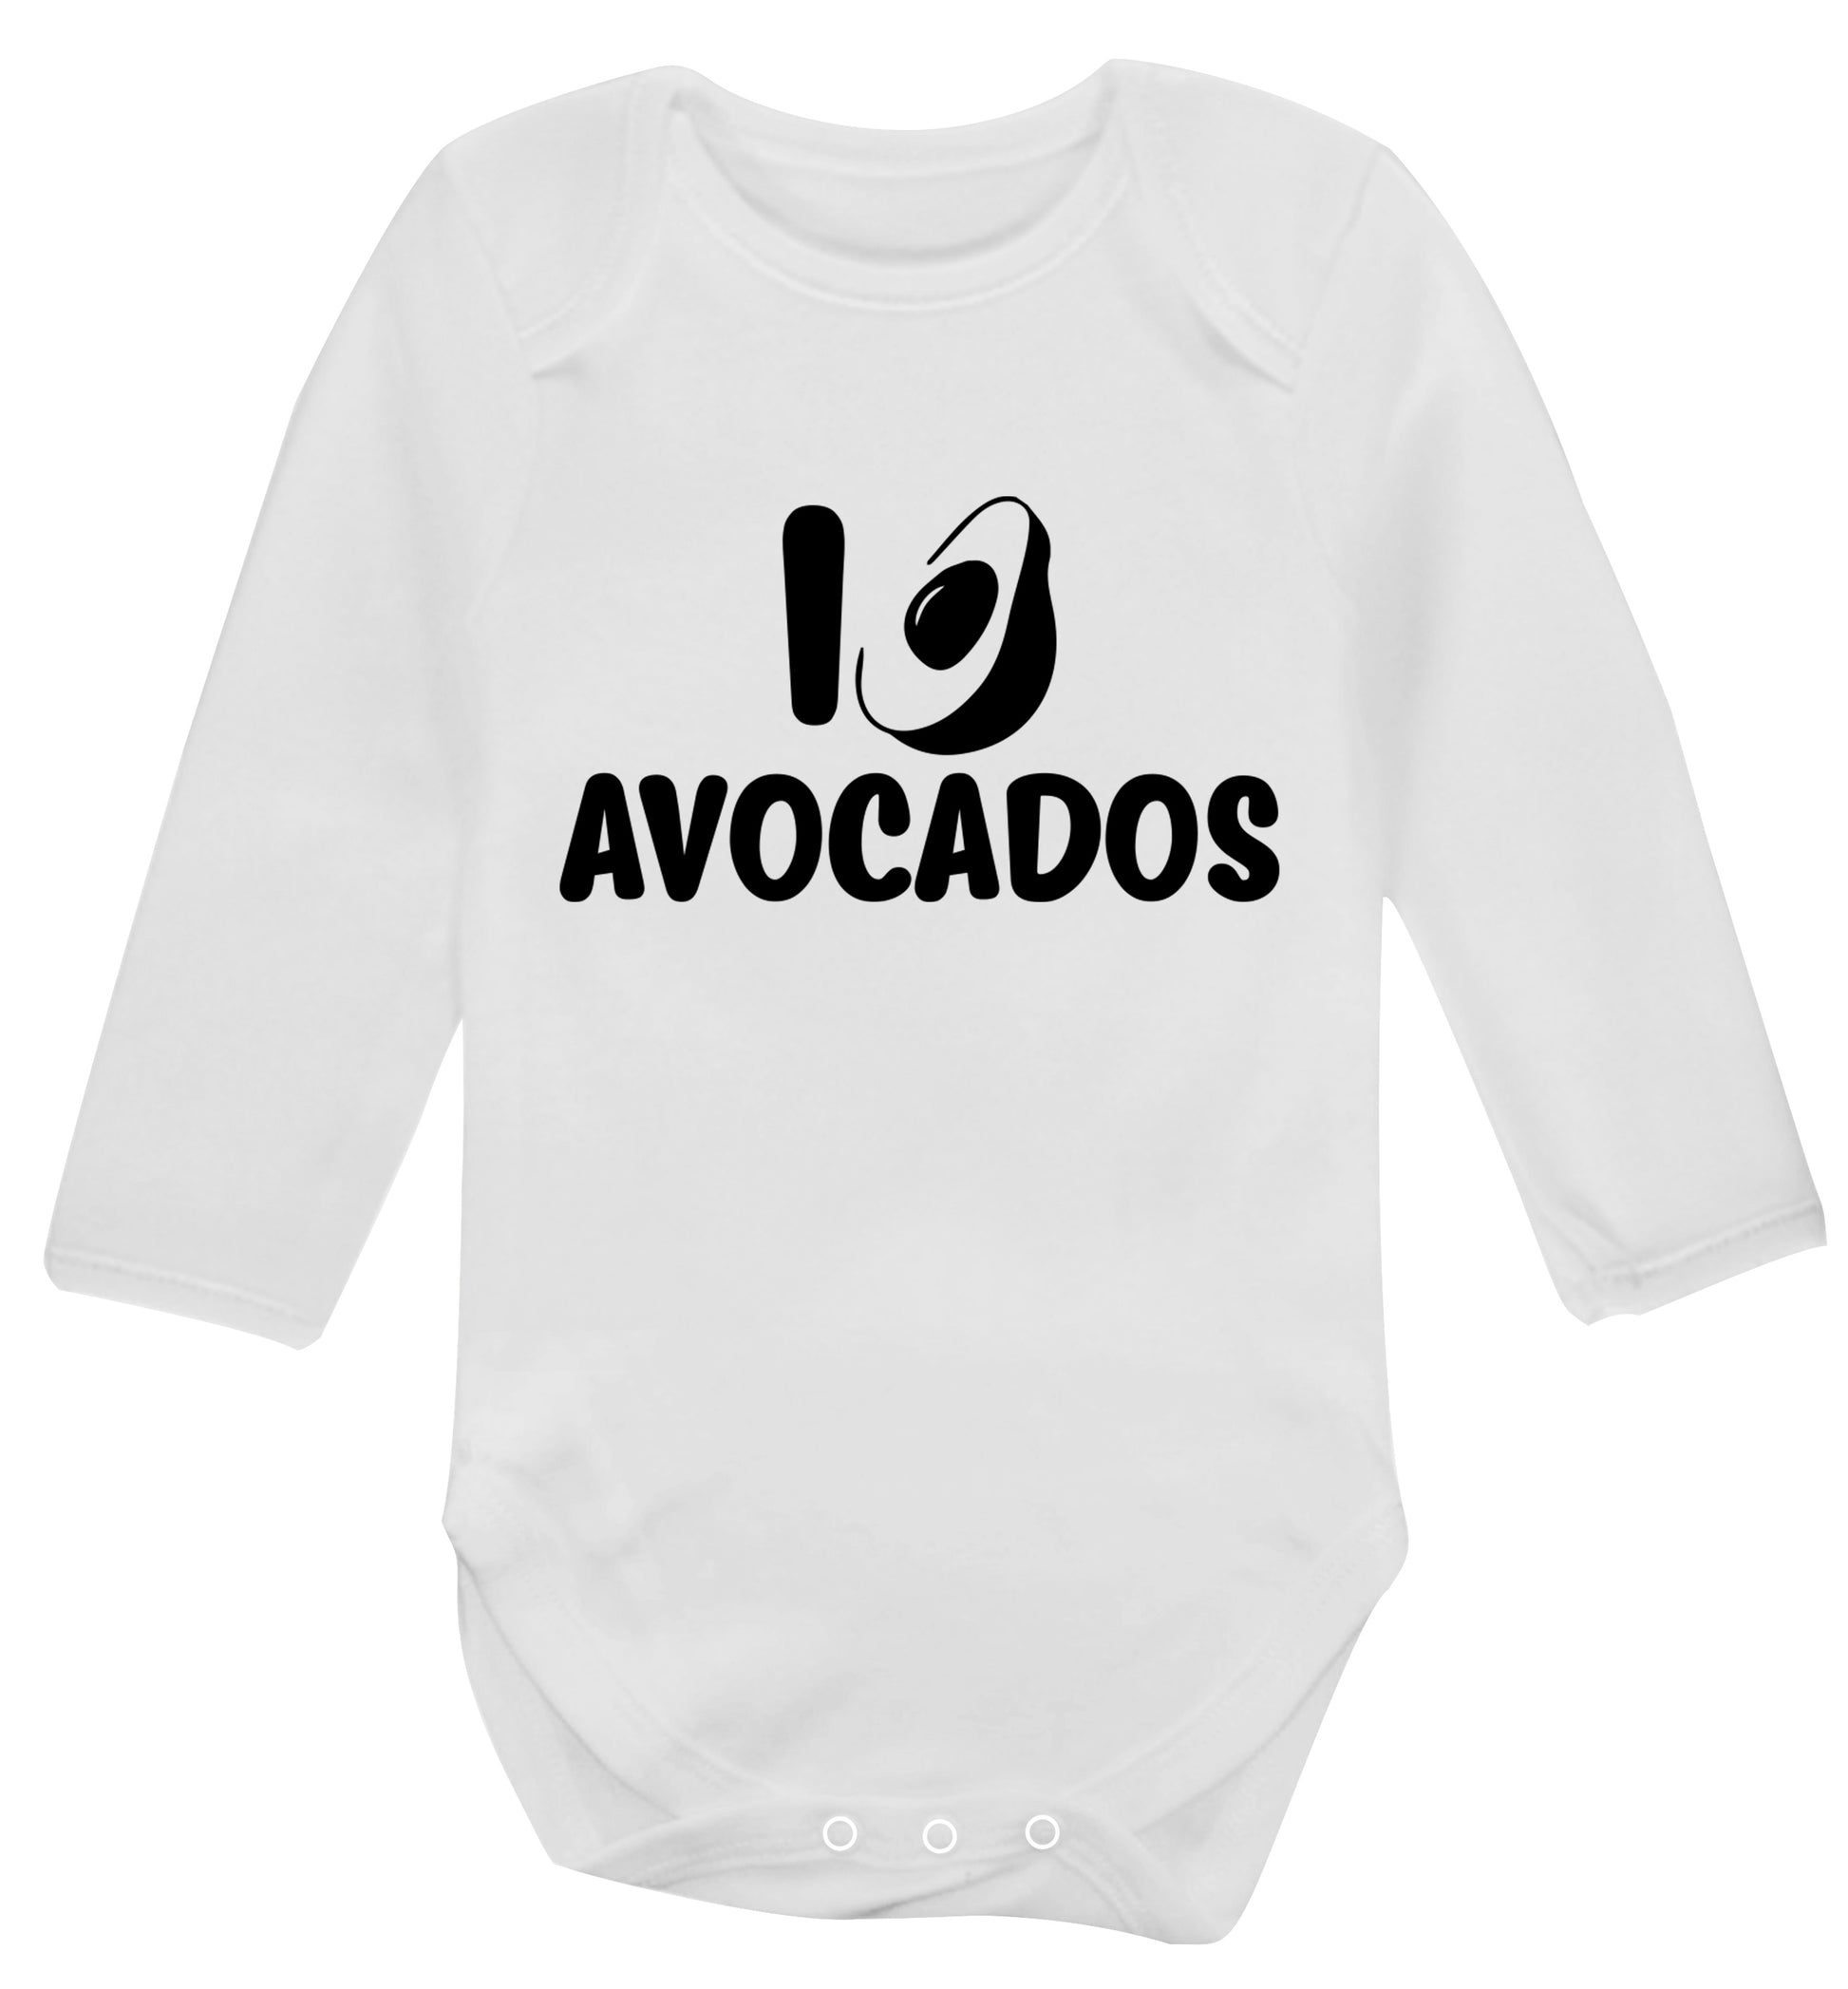 I love avocados Baby Vest long sleeved white 6-12 months